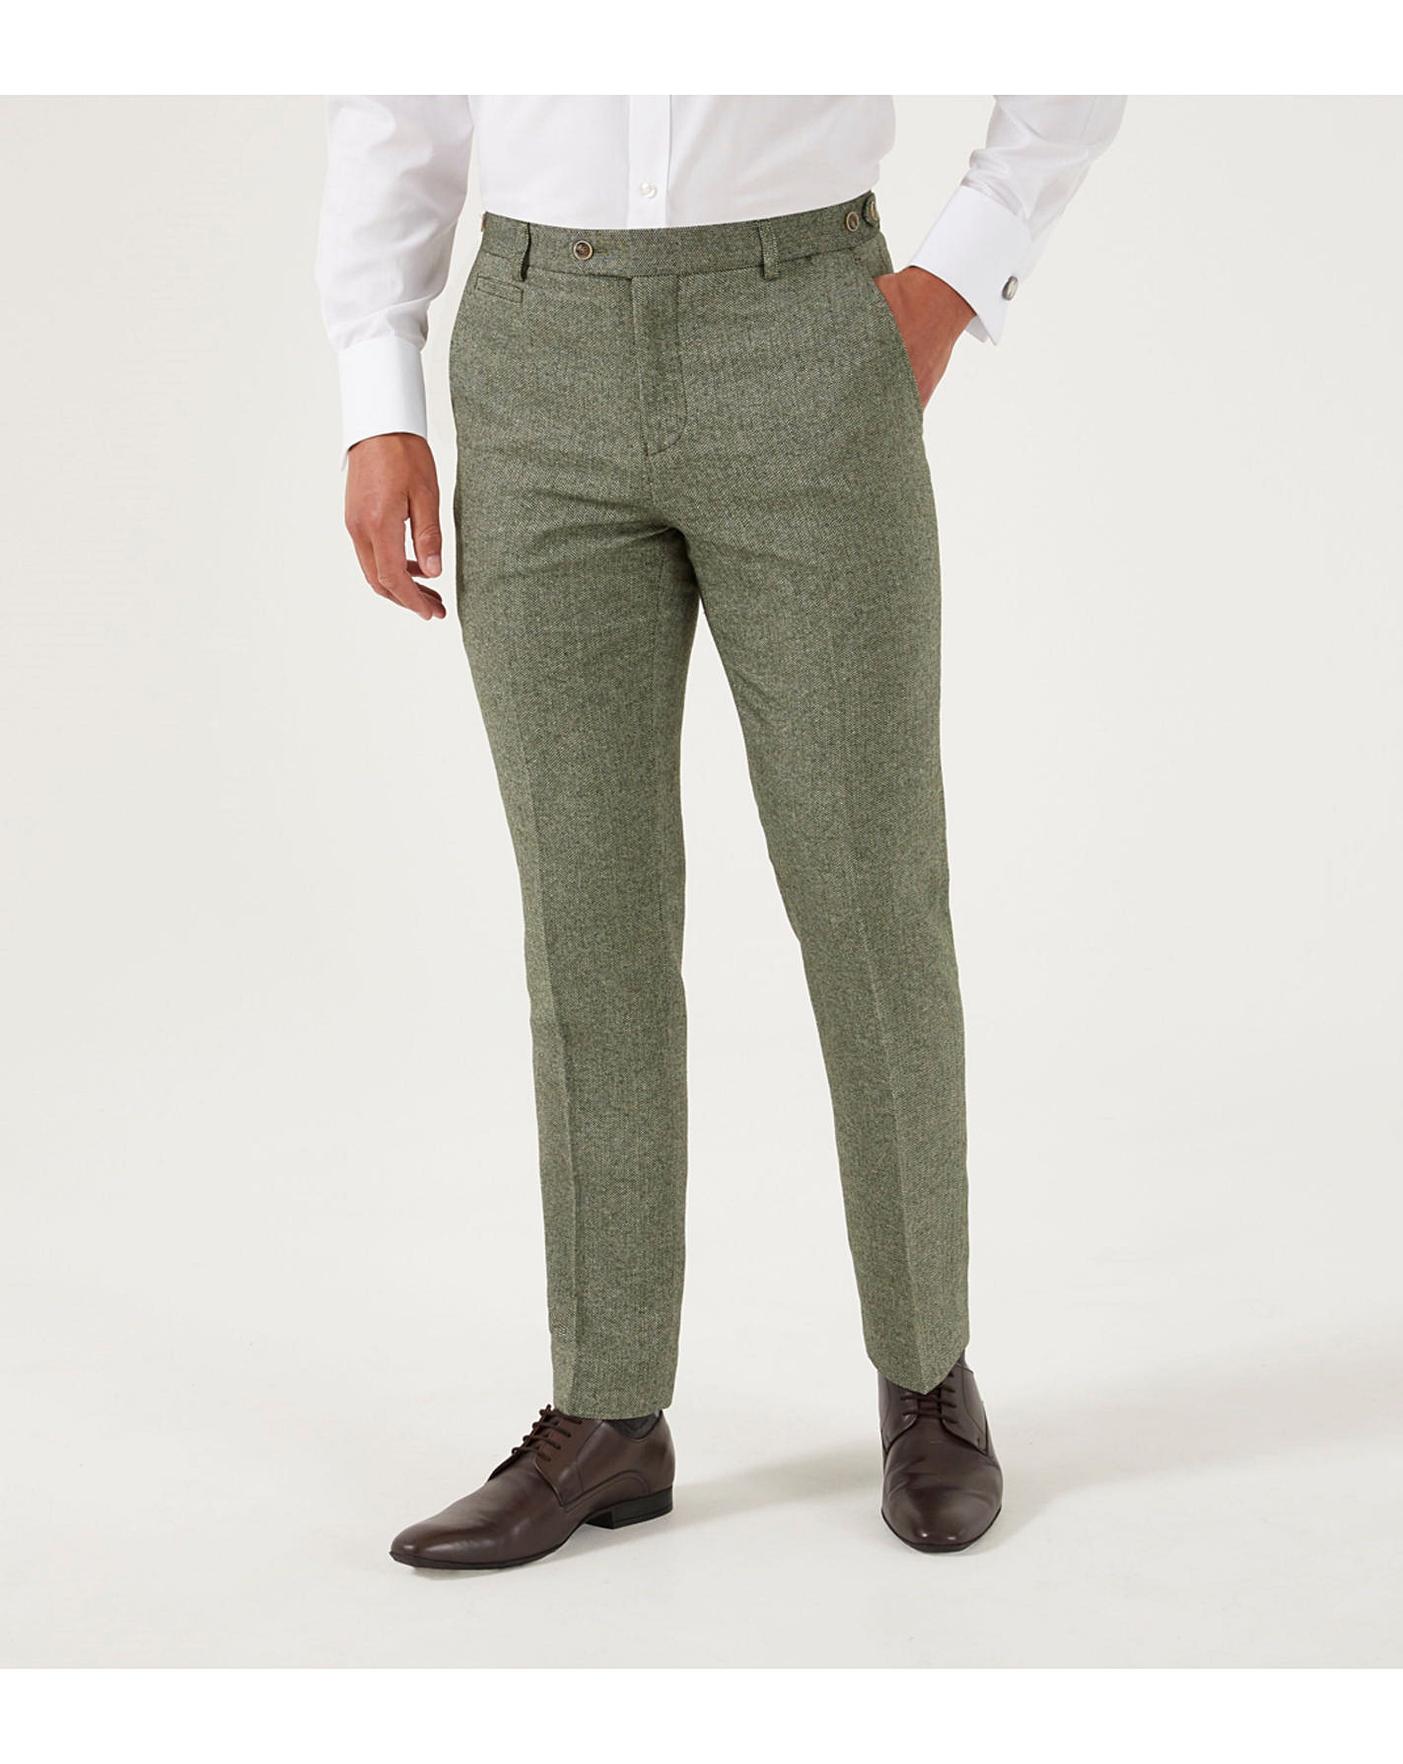 Jude Suiting Pant